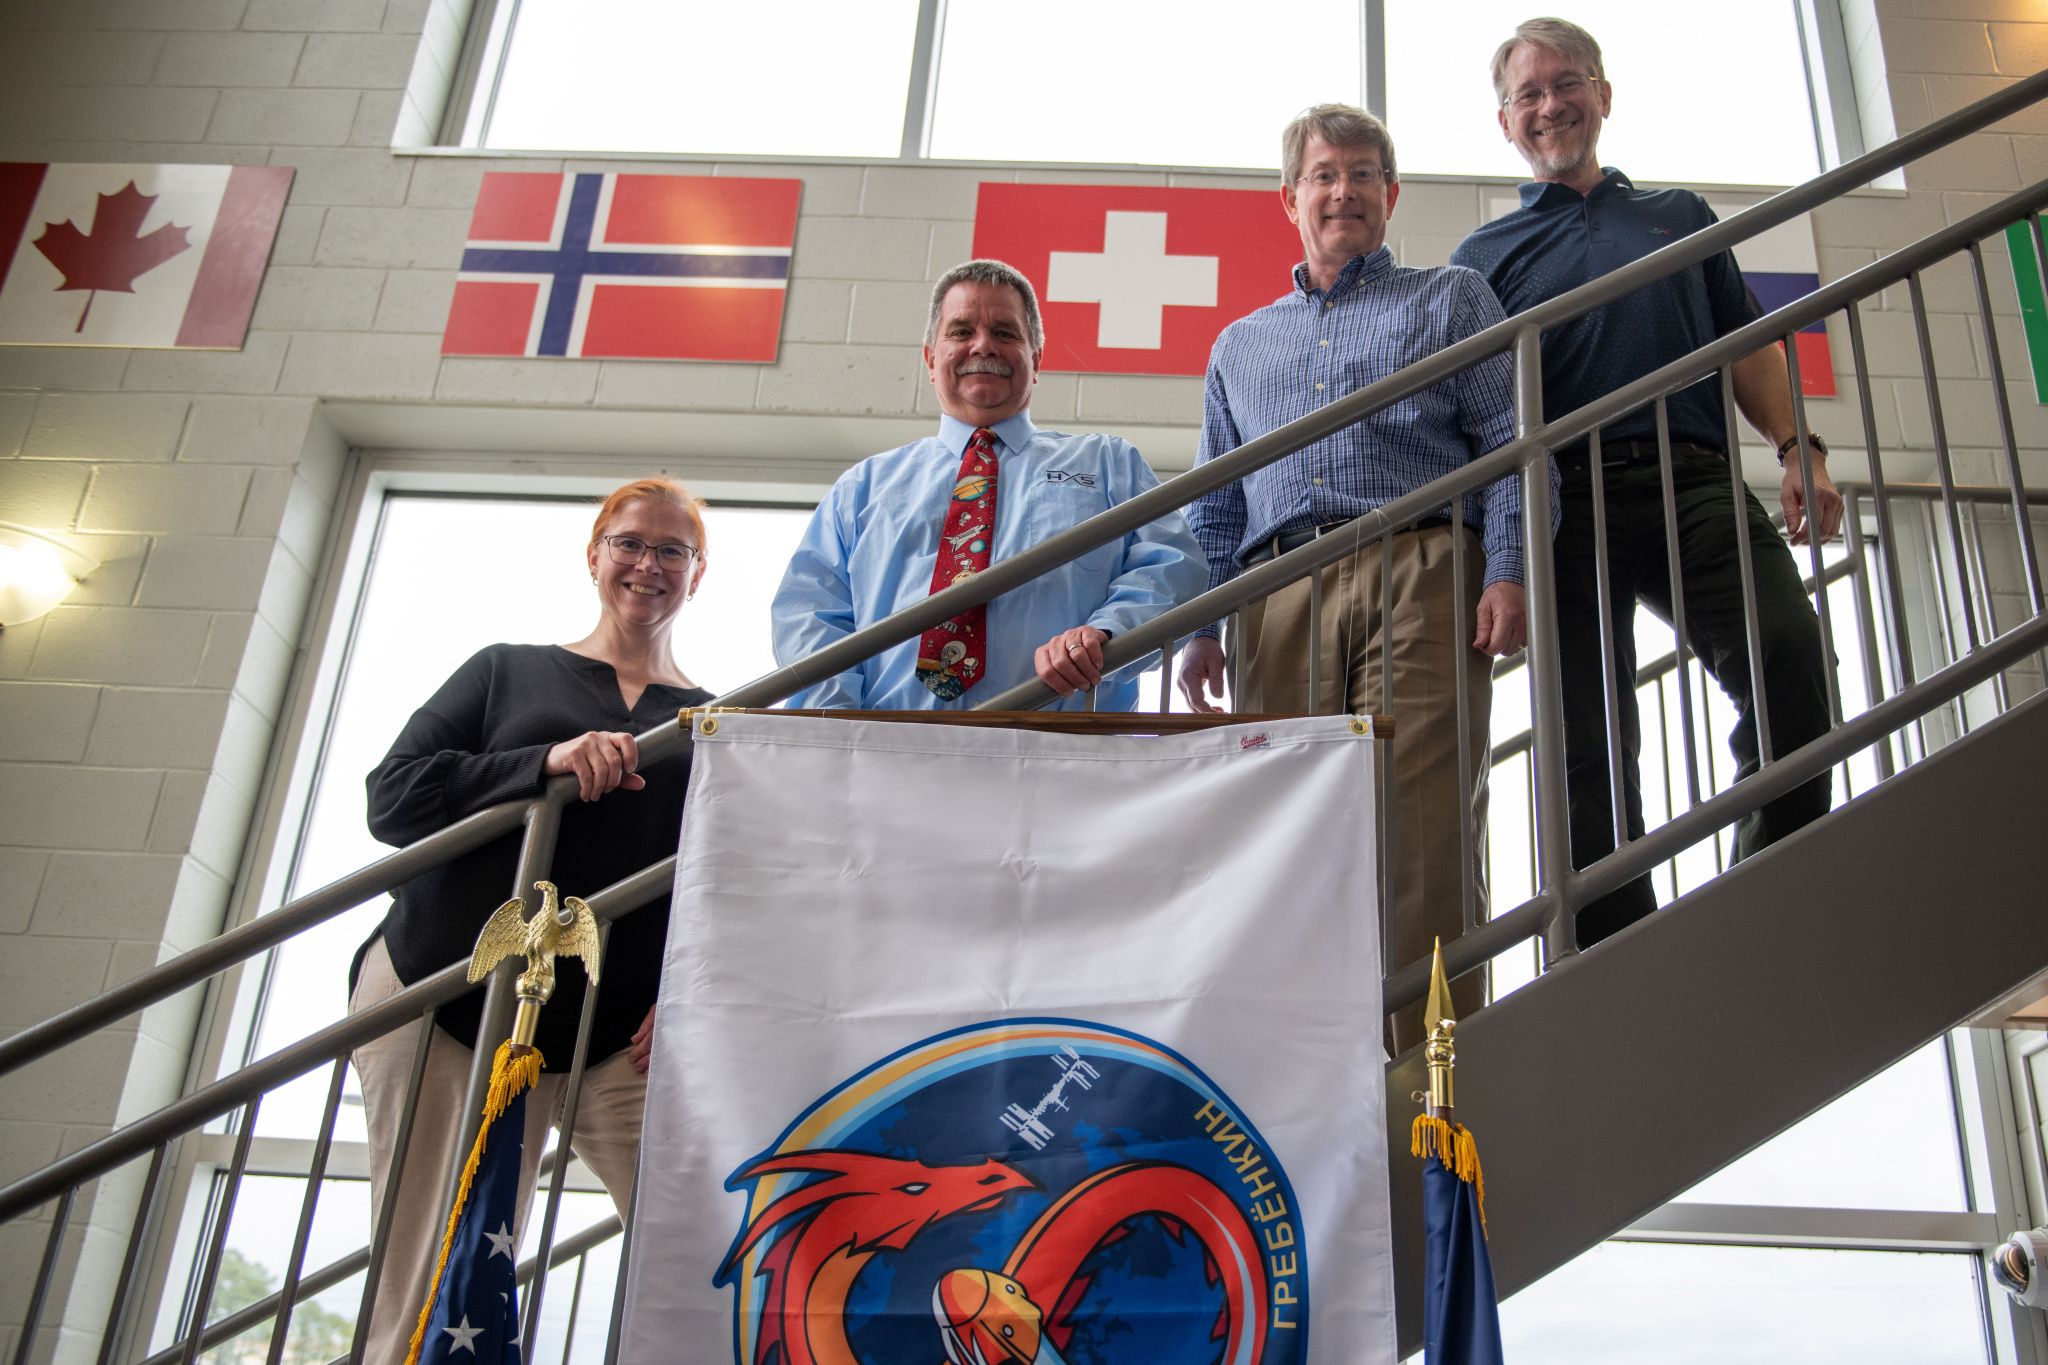 From left, Pelfrey, Oelkers, Earhart, and Gwaltney smile together after hanging the Crew-8 mission flag.